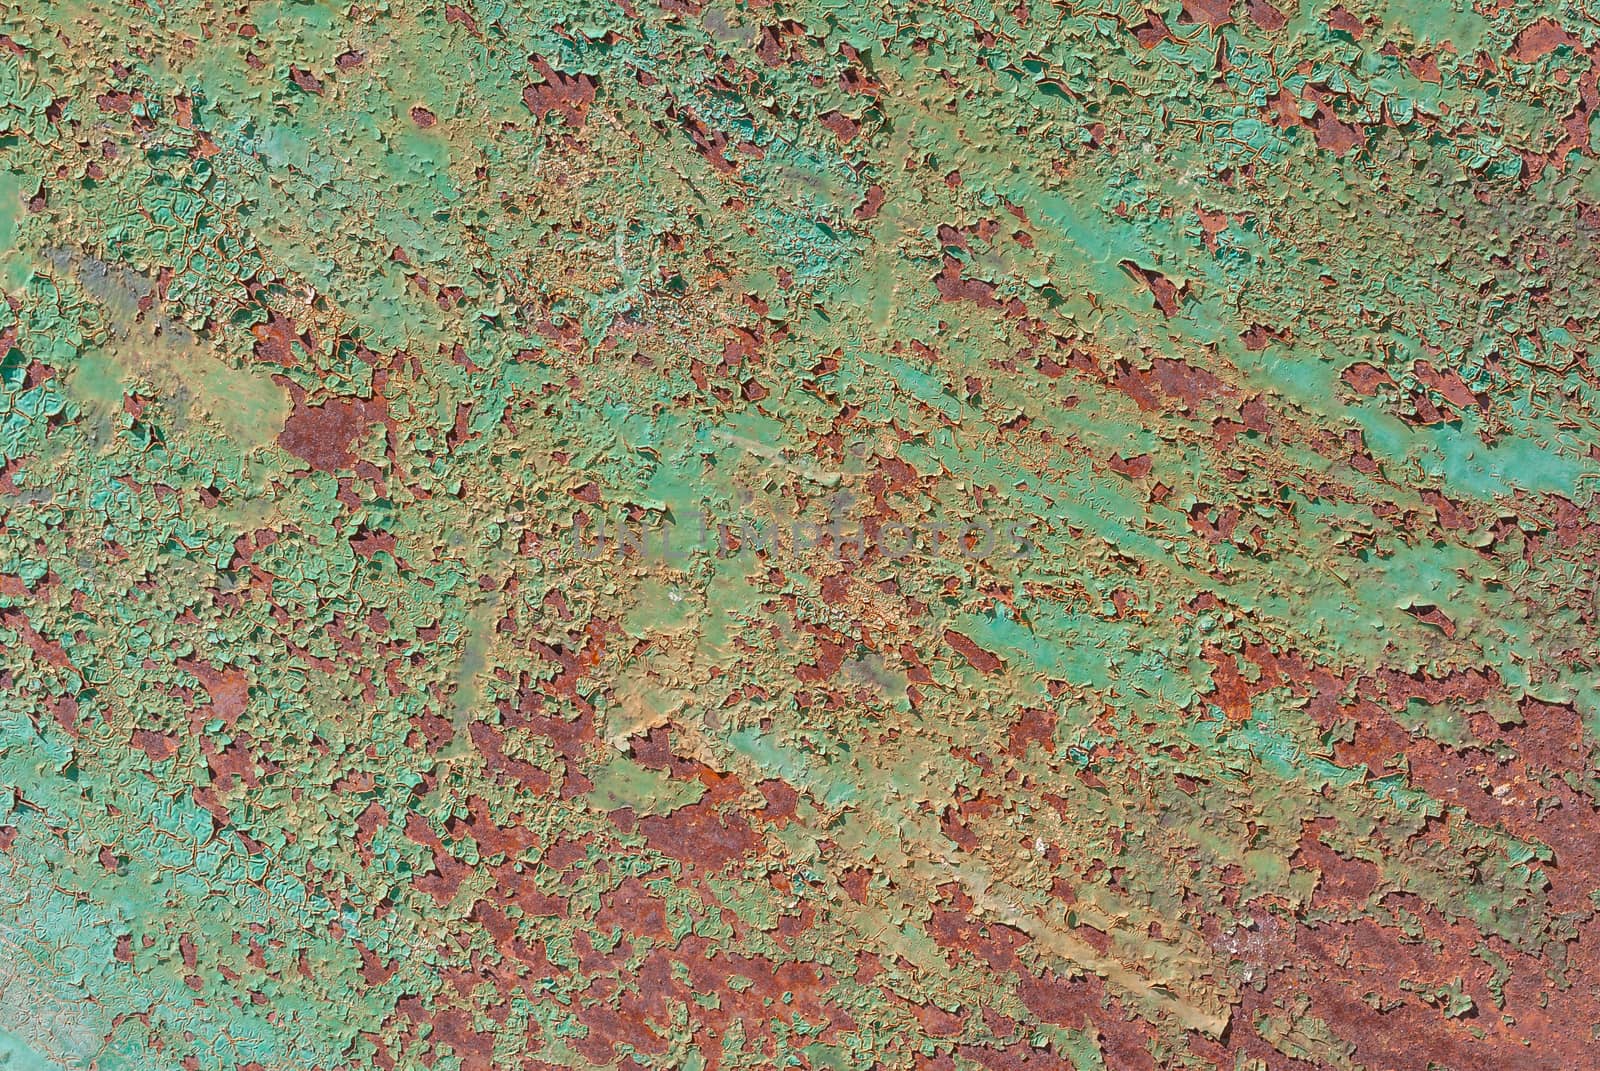 surface of rusty iron with remnants of old paint, grunge metal surface, texture background by uvisni